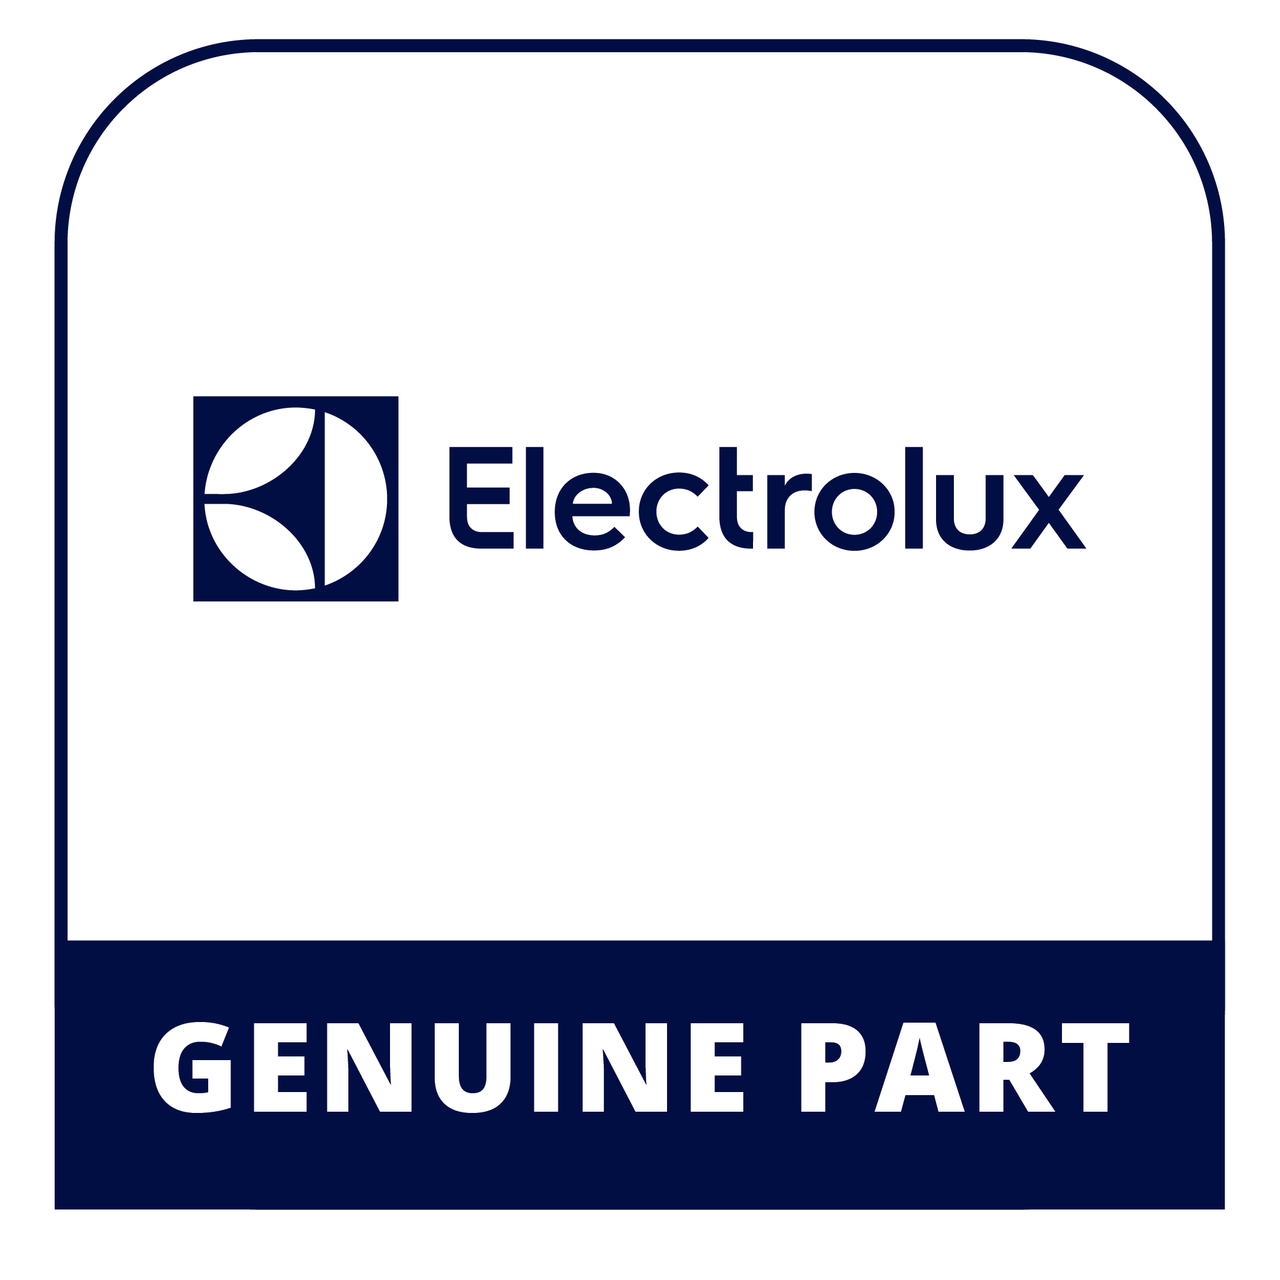 Frigidaire - Electrolux 318200773 Use & Care Guide - Genuine Electrolux Part